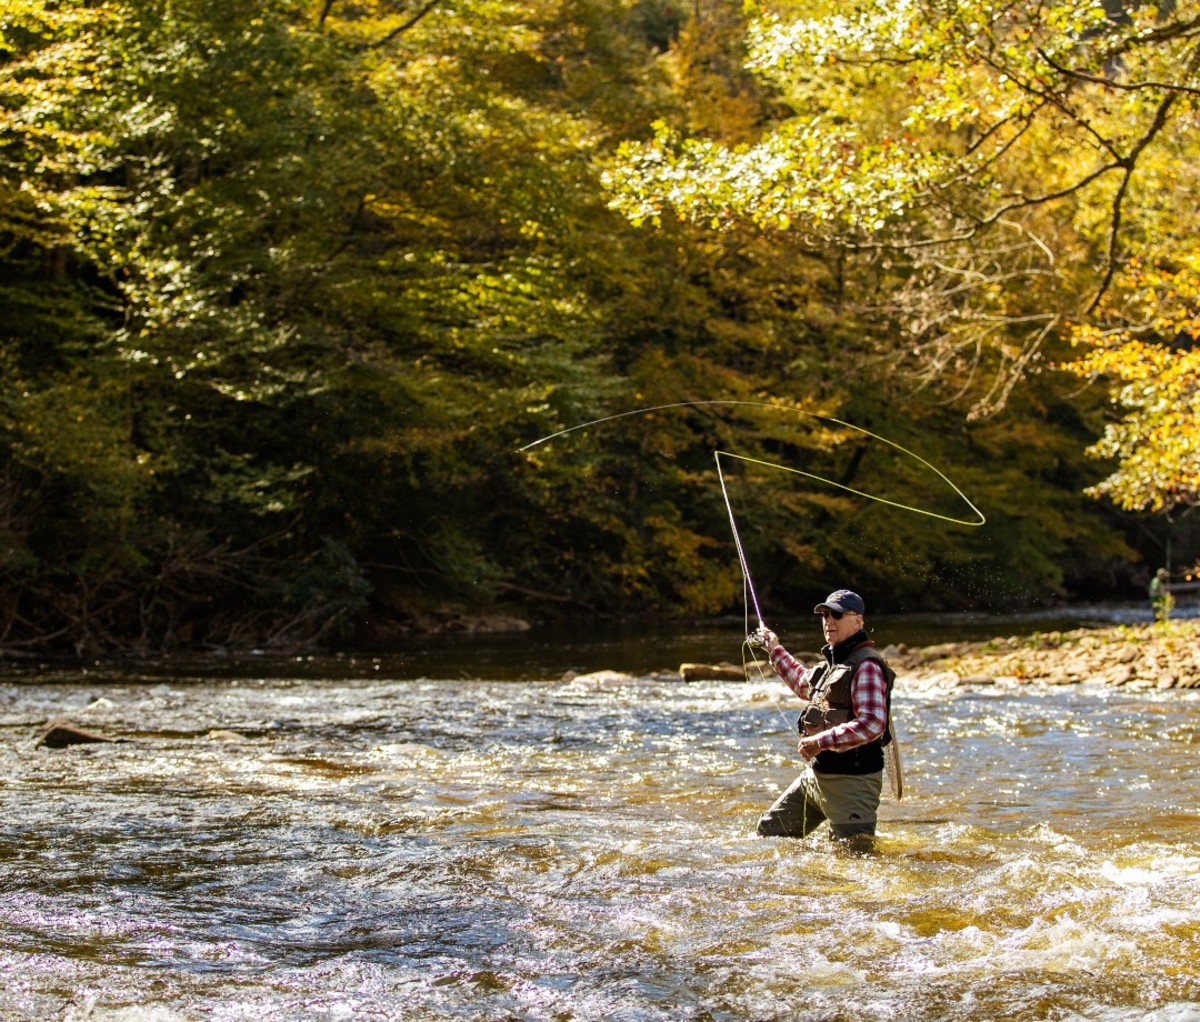 Fly-fishing in river